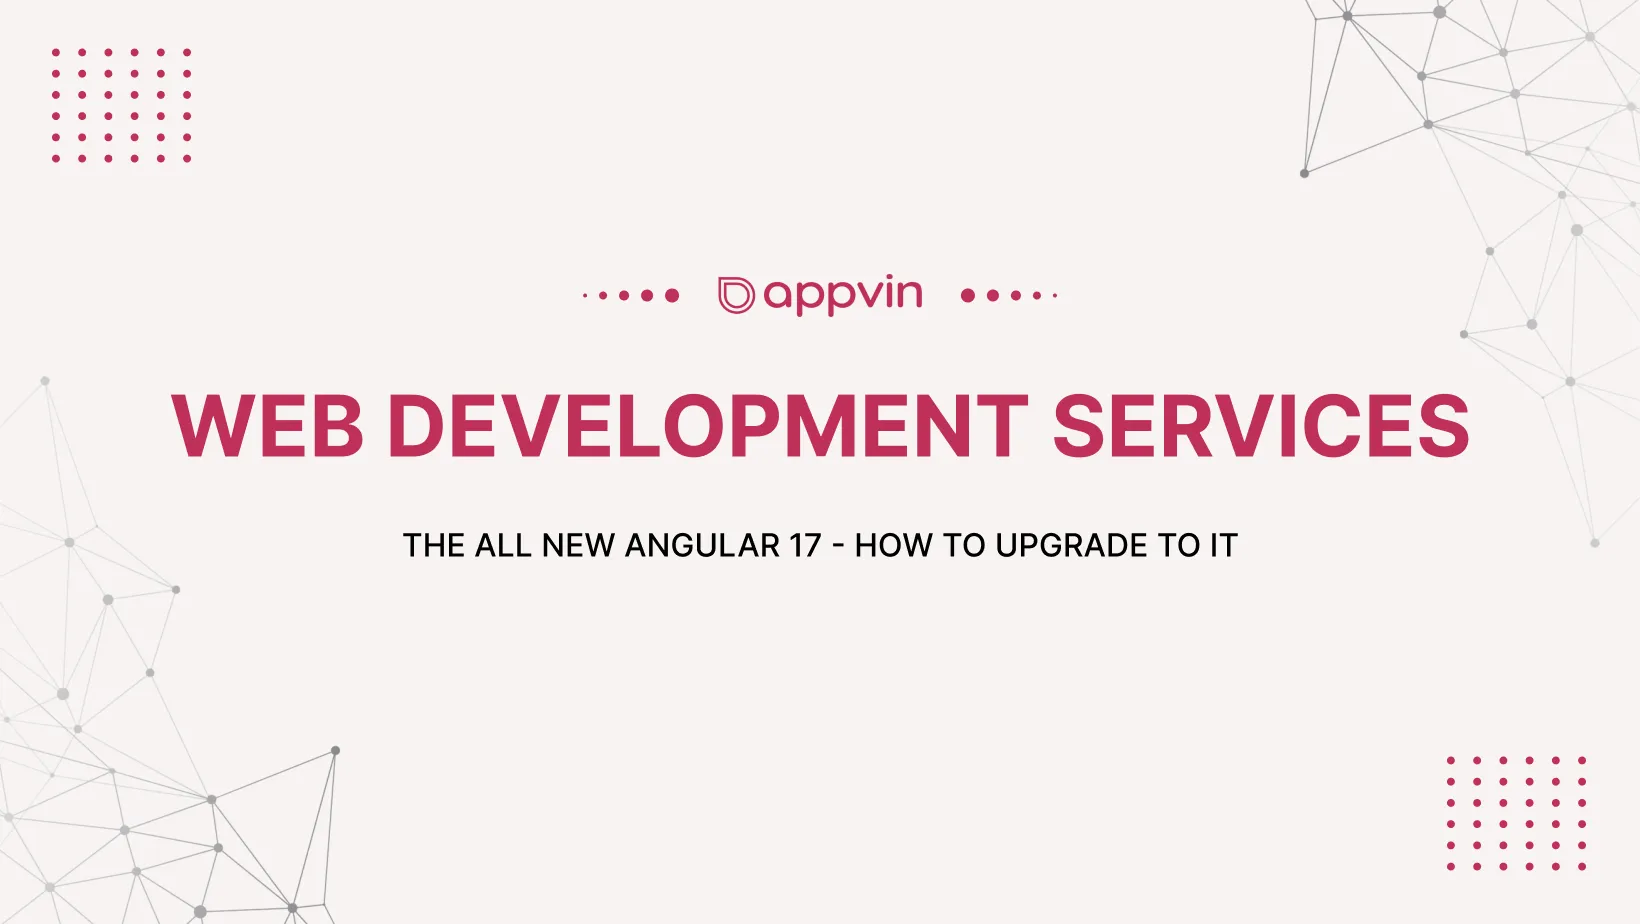 The All New Angular 17 - How to Upgrade to it